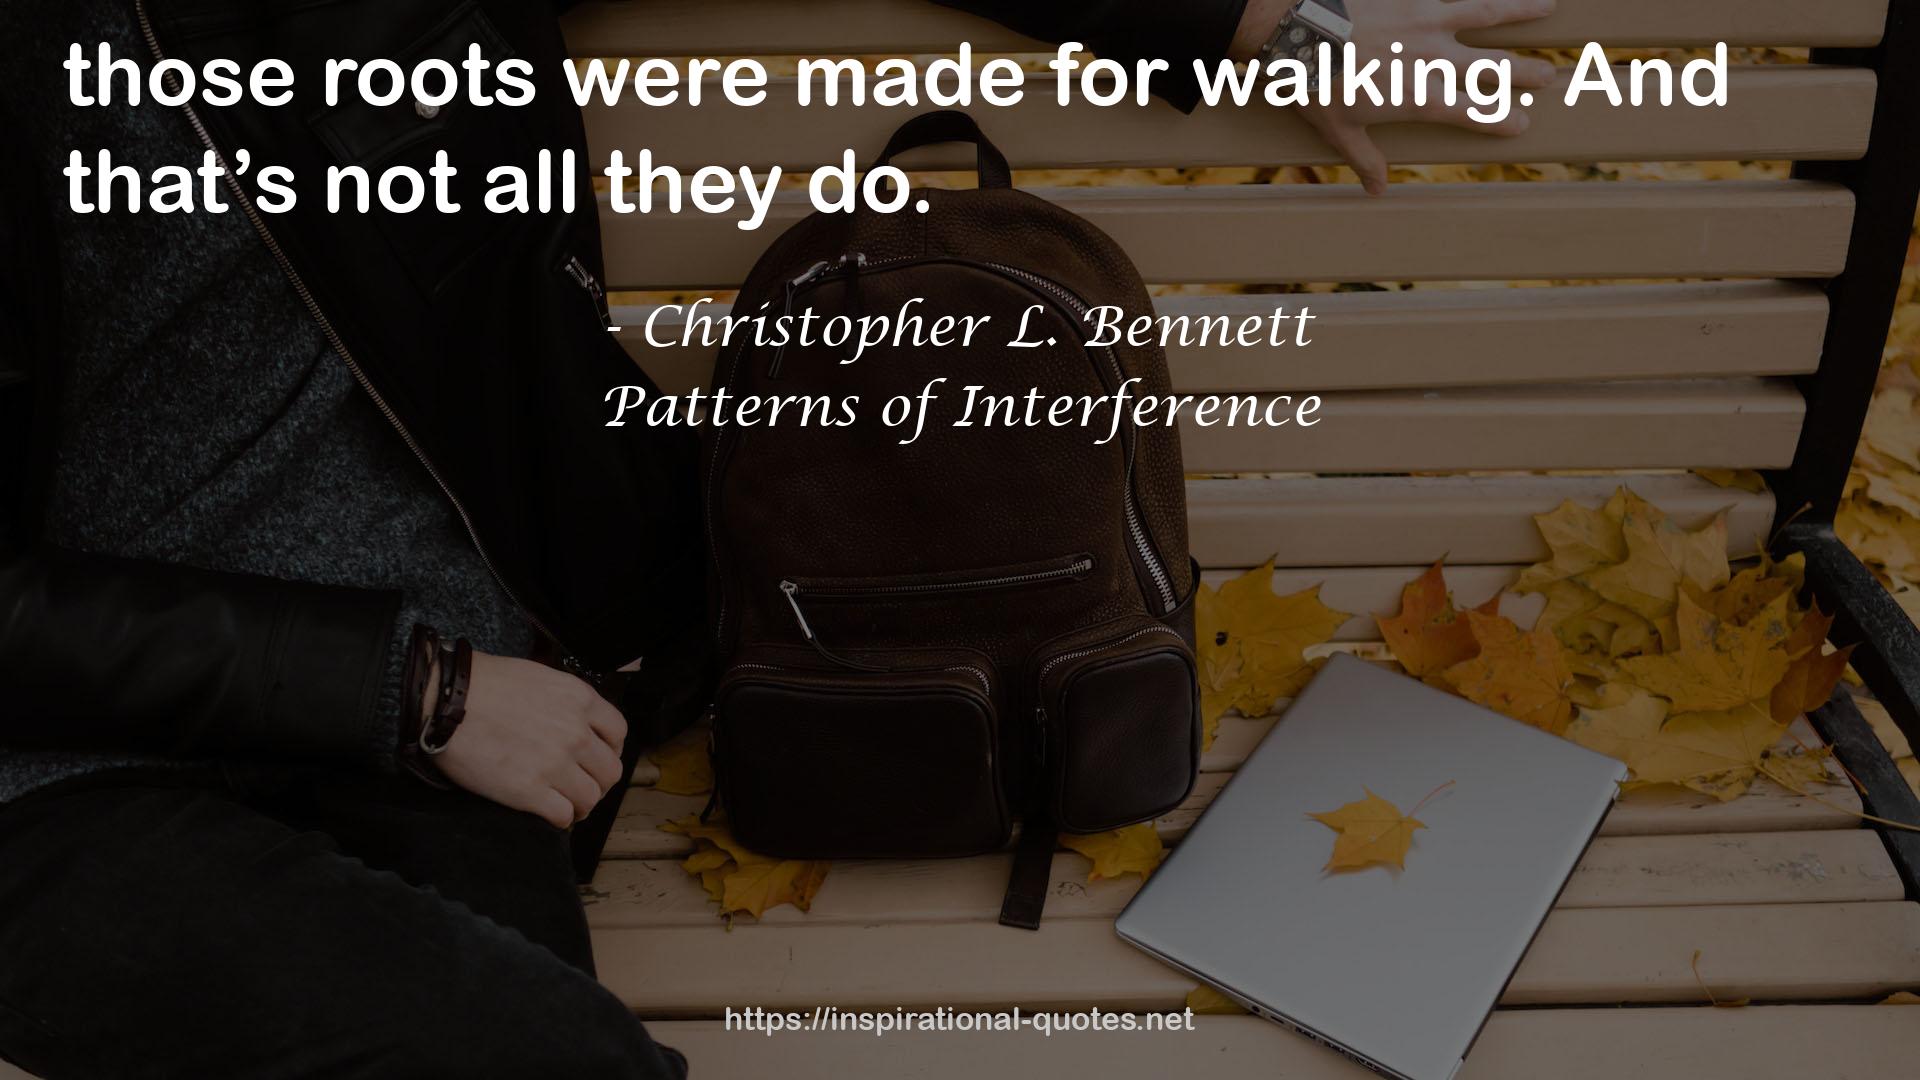 Patterns of Interference QUOTES